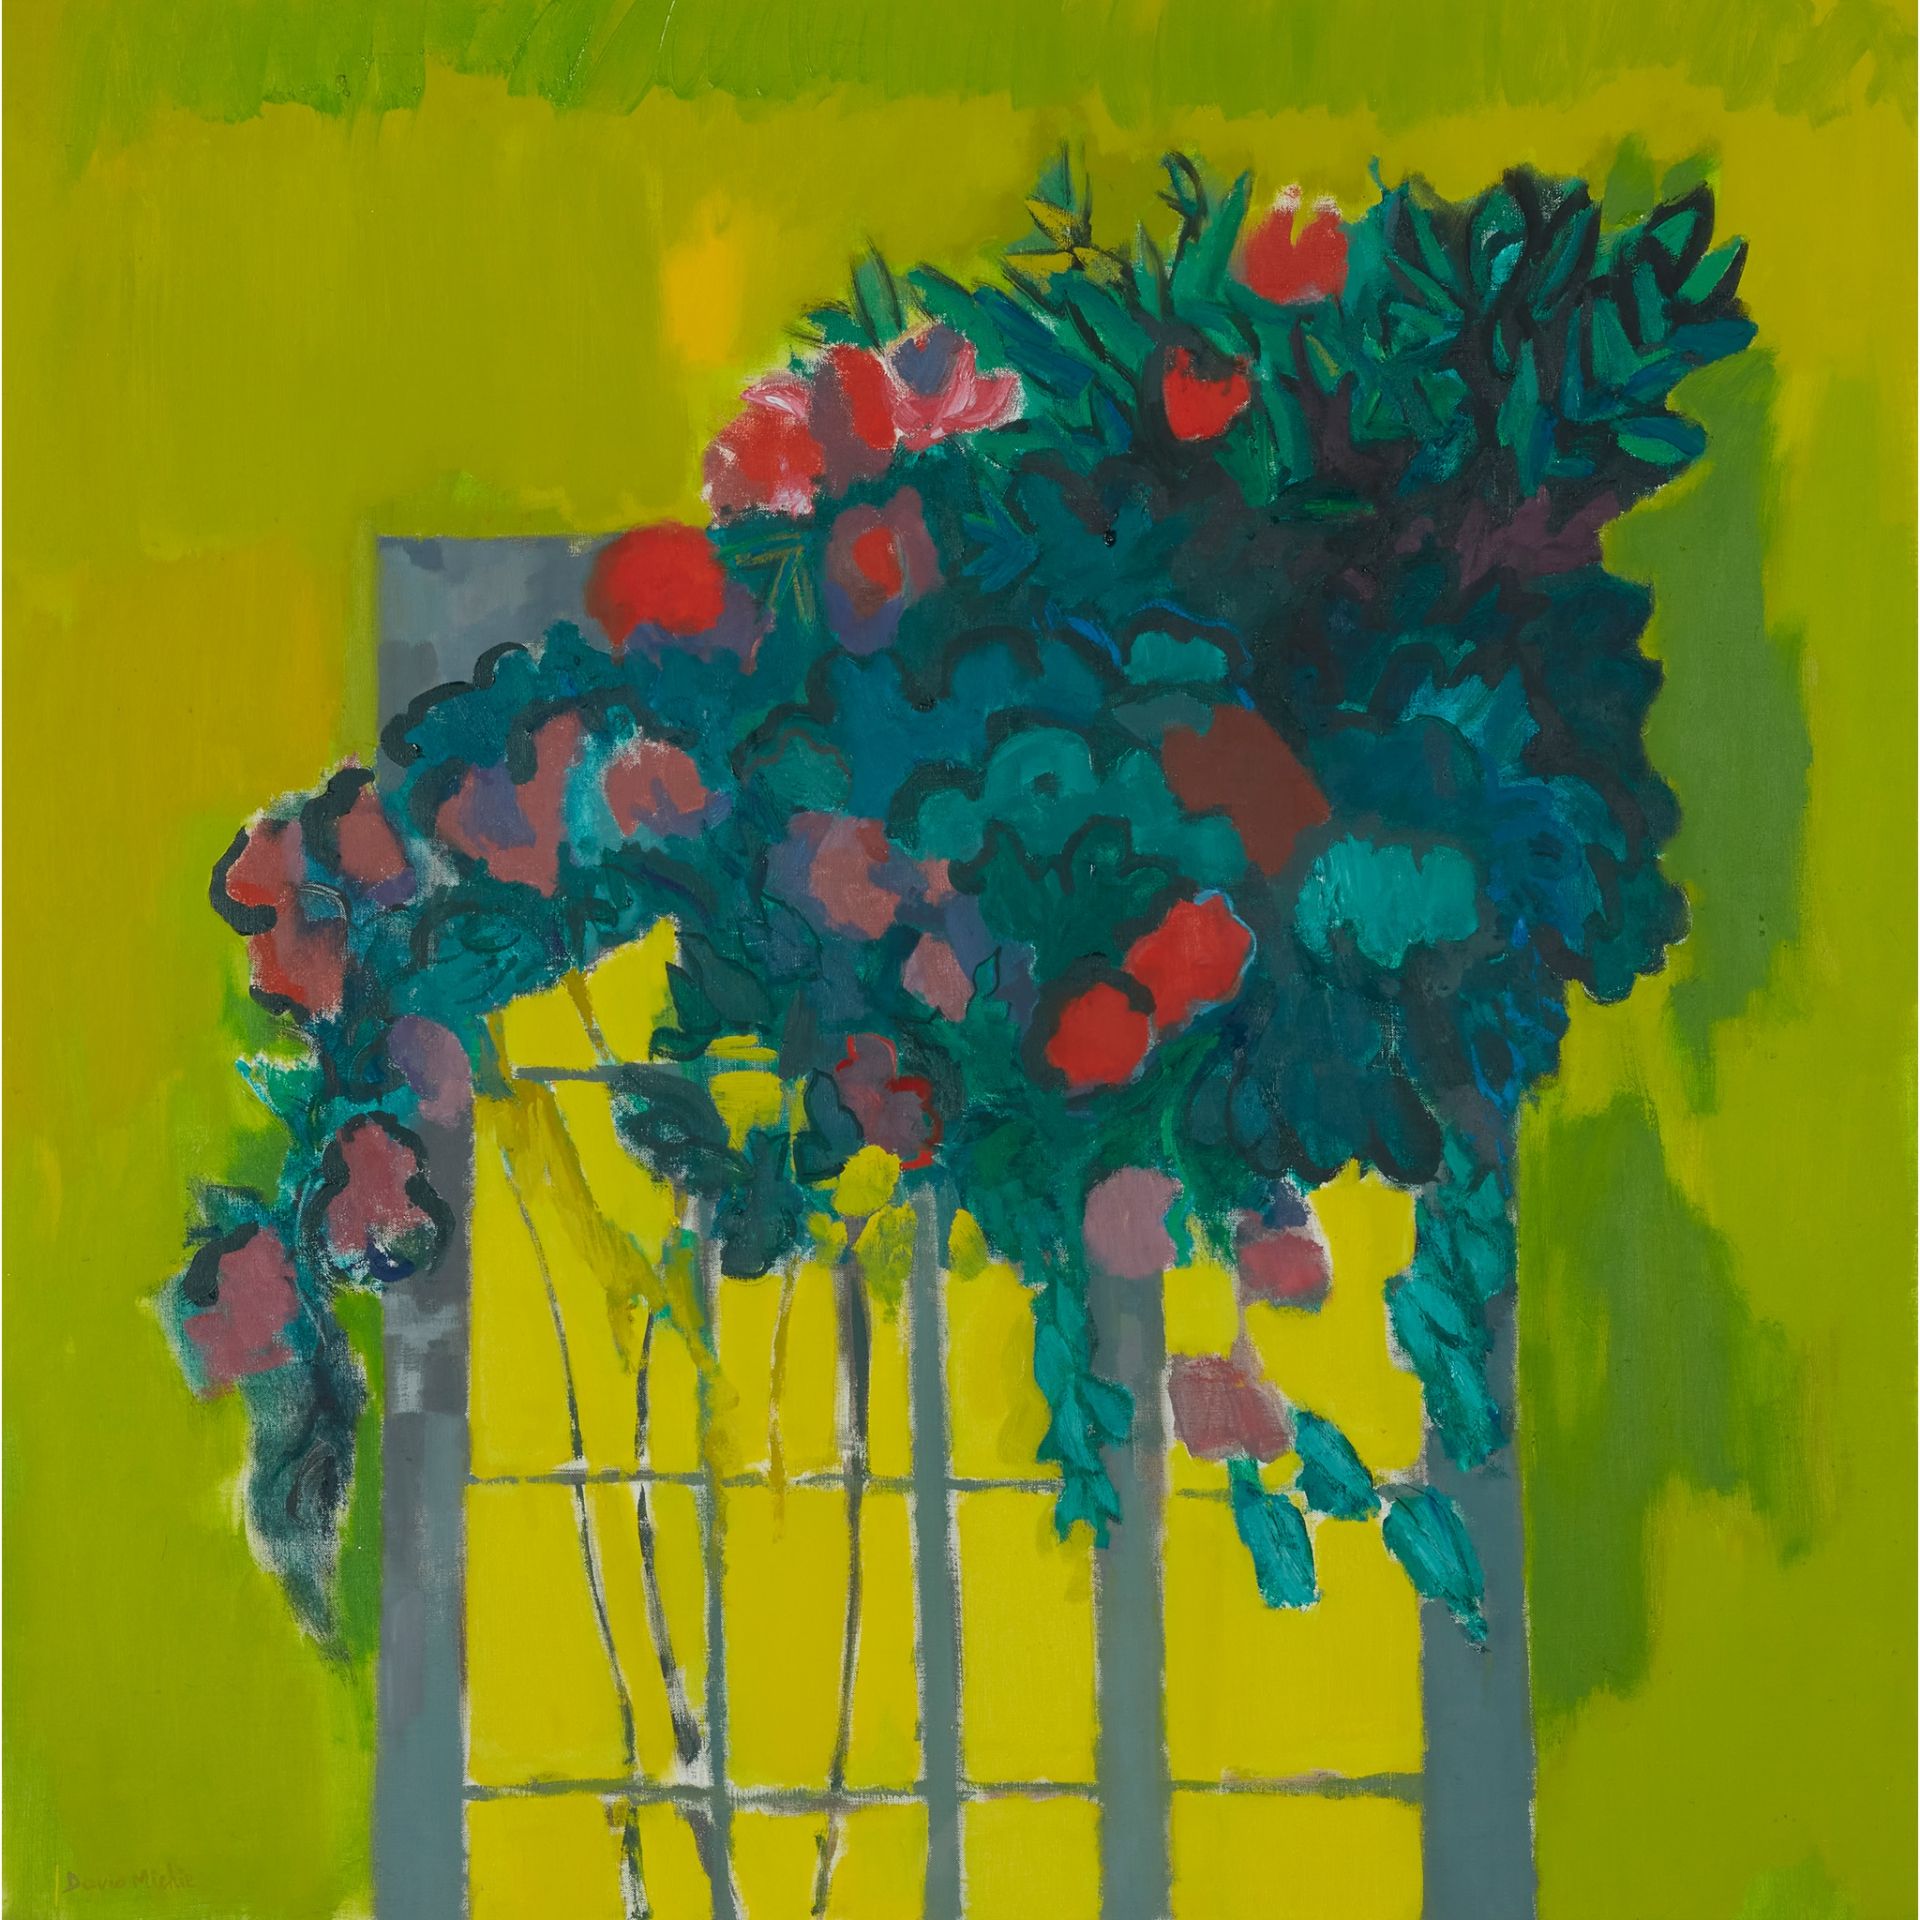 § DAVID MICHIE O.B.E., R.S.A., R.G.I., F.R.S.A (SCOTTISH 1928-2015) UNTITLED (FLOWERS ON A GREEN